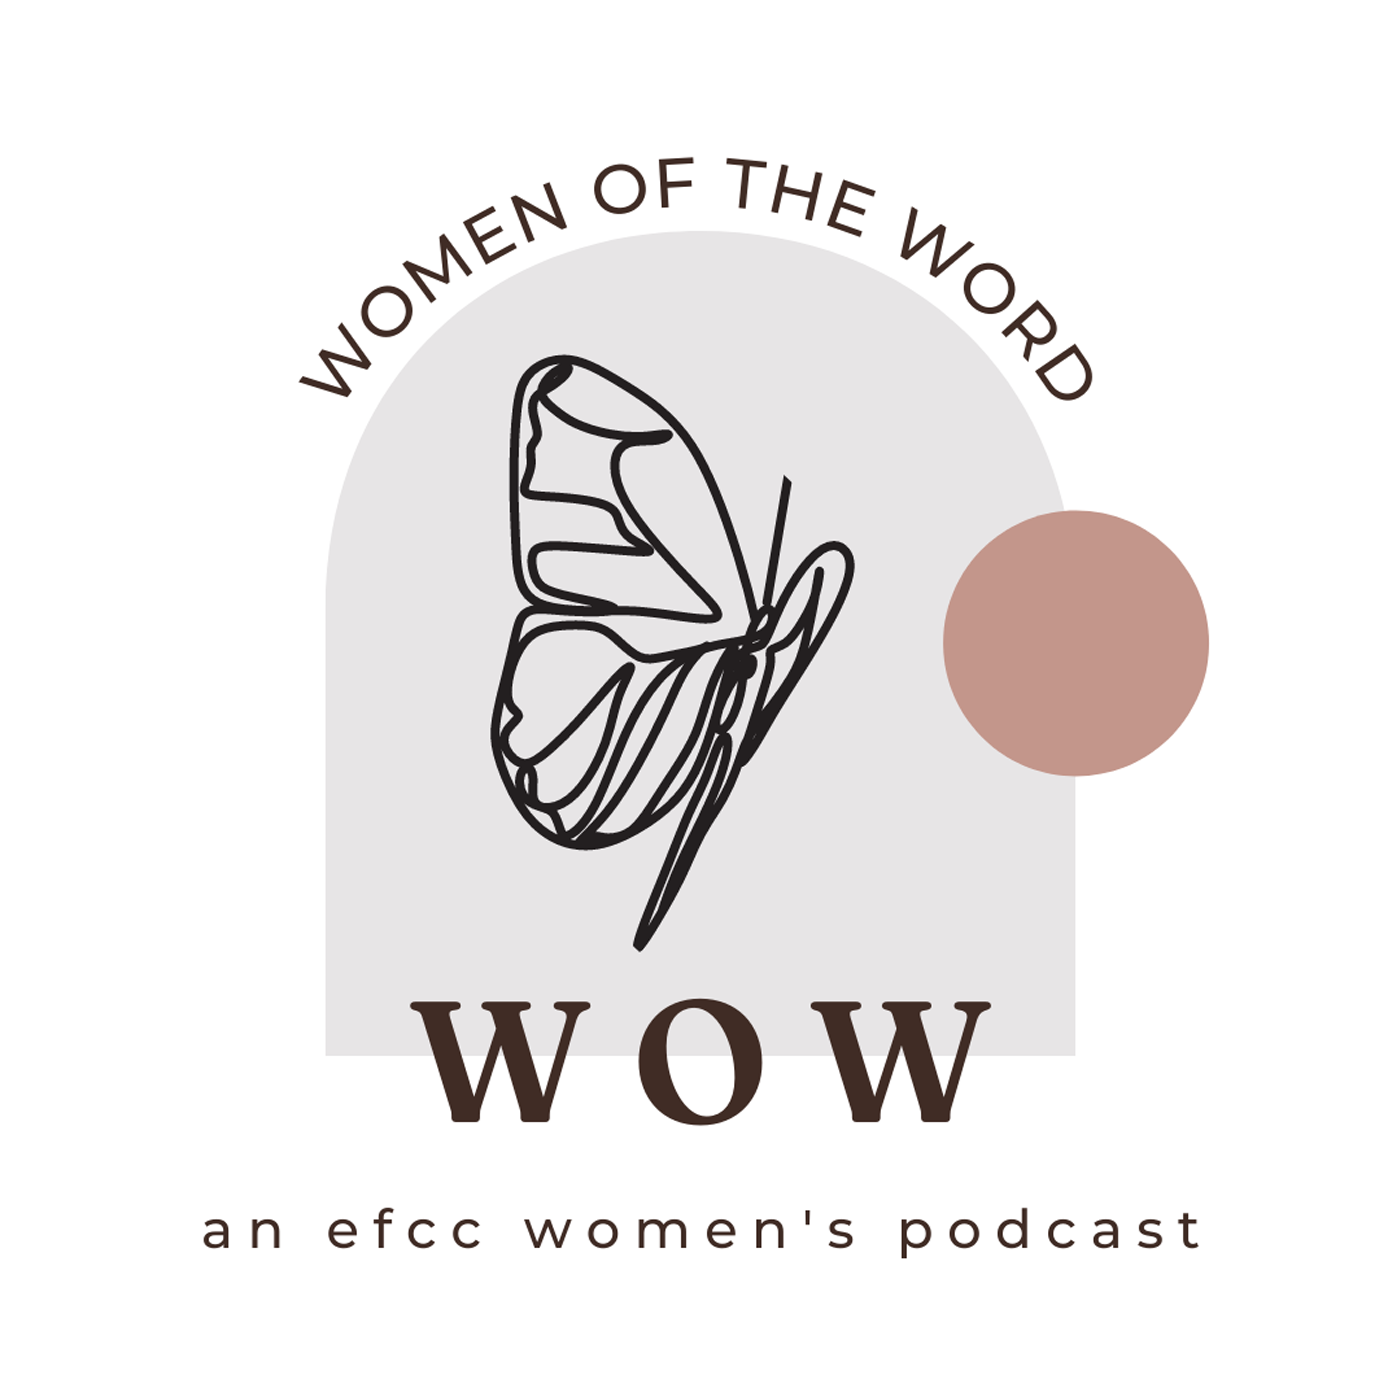 WOW: Women of the Word